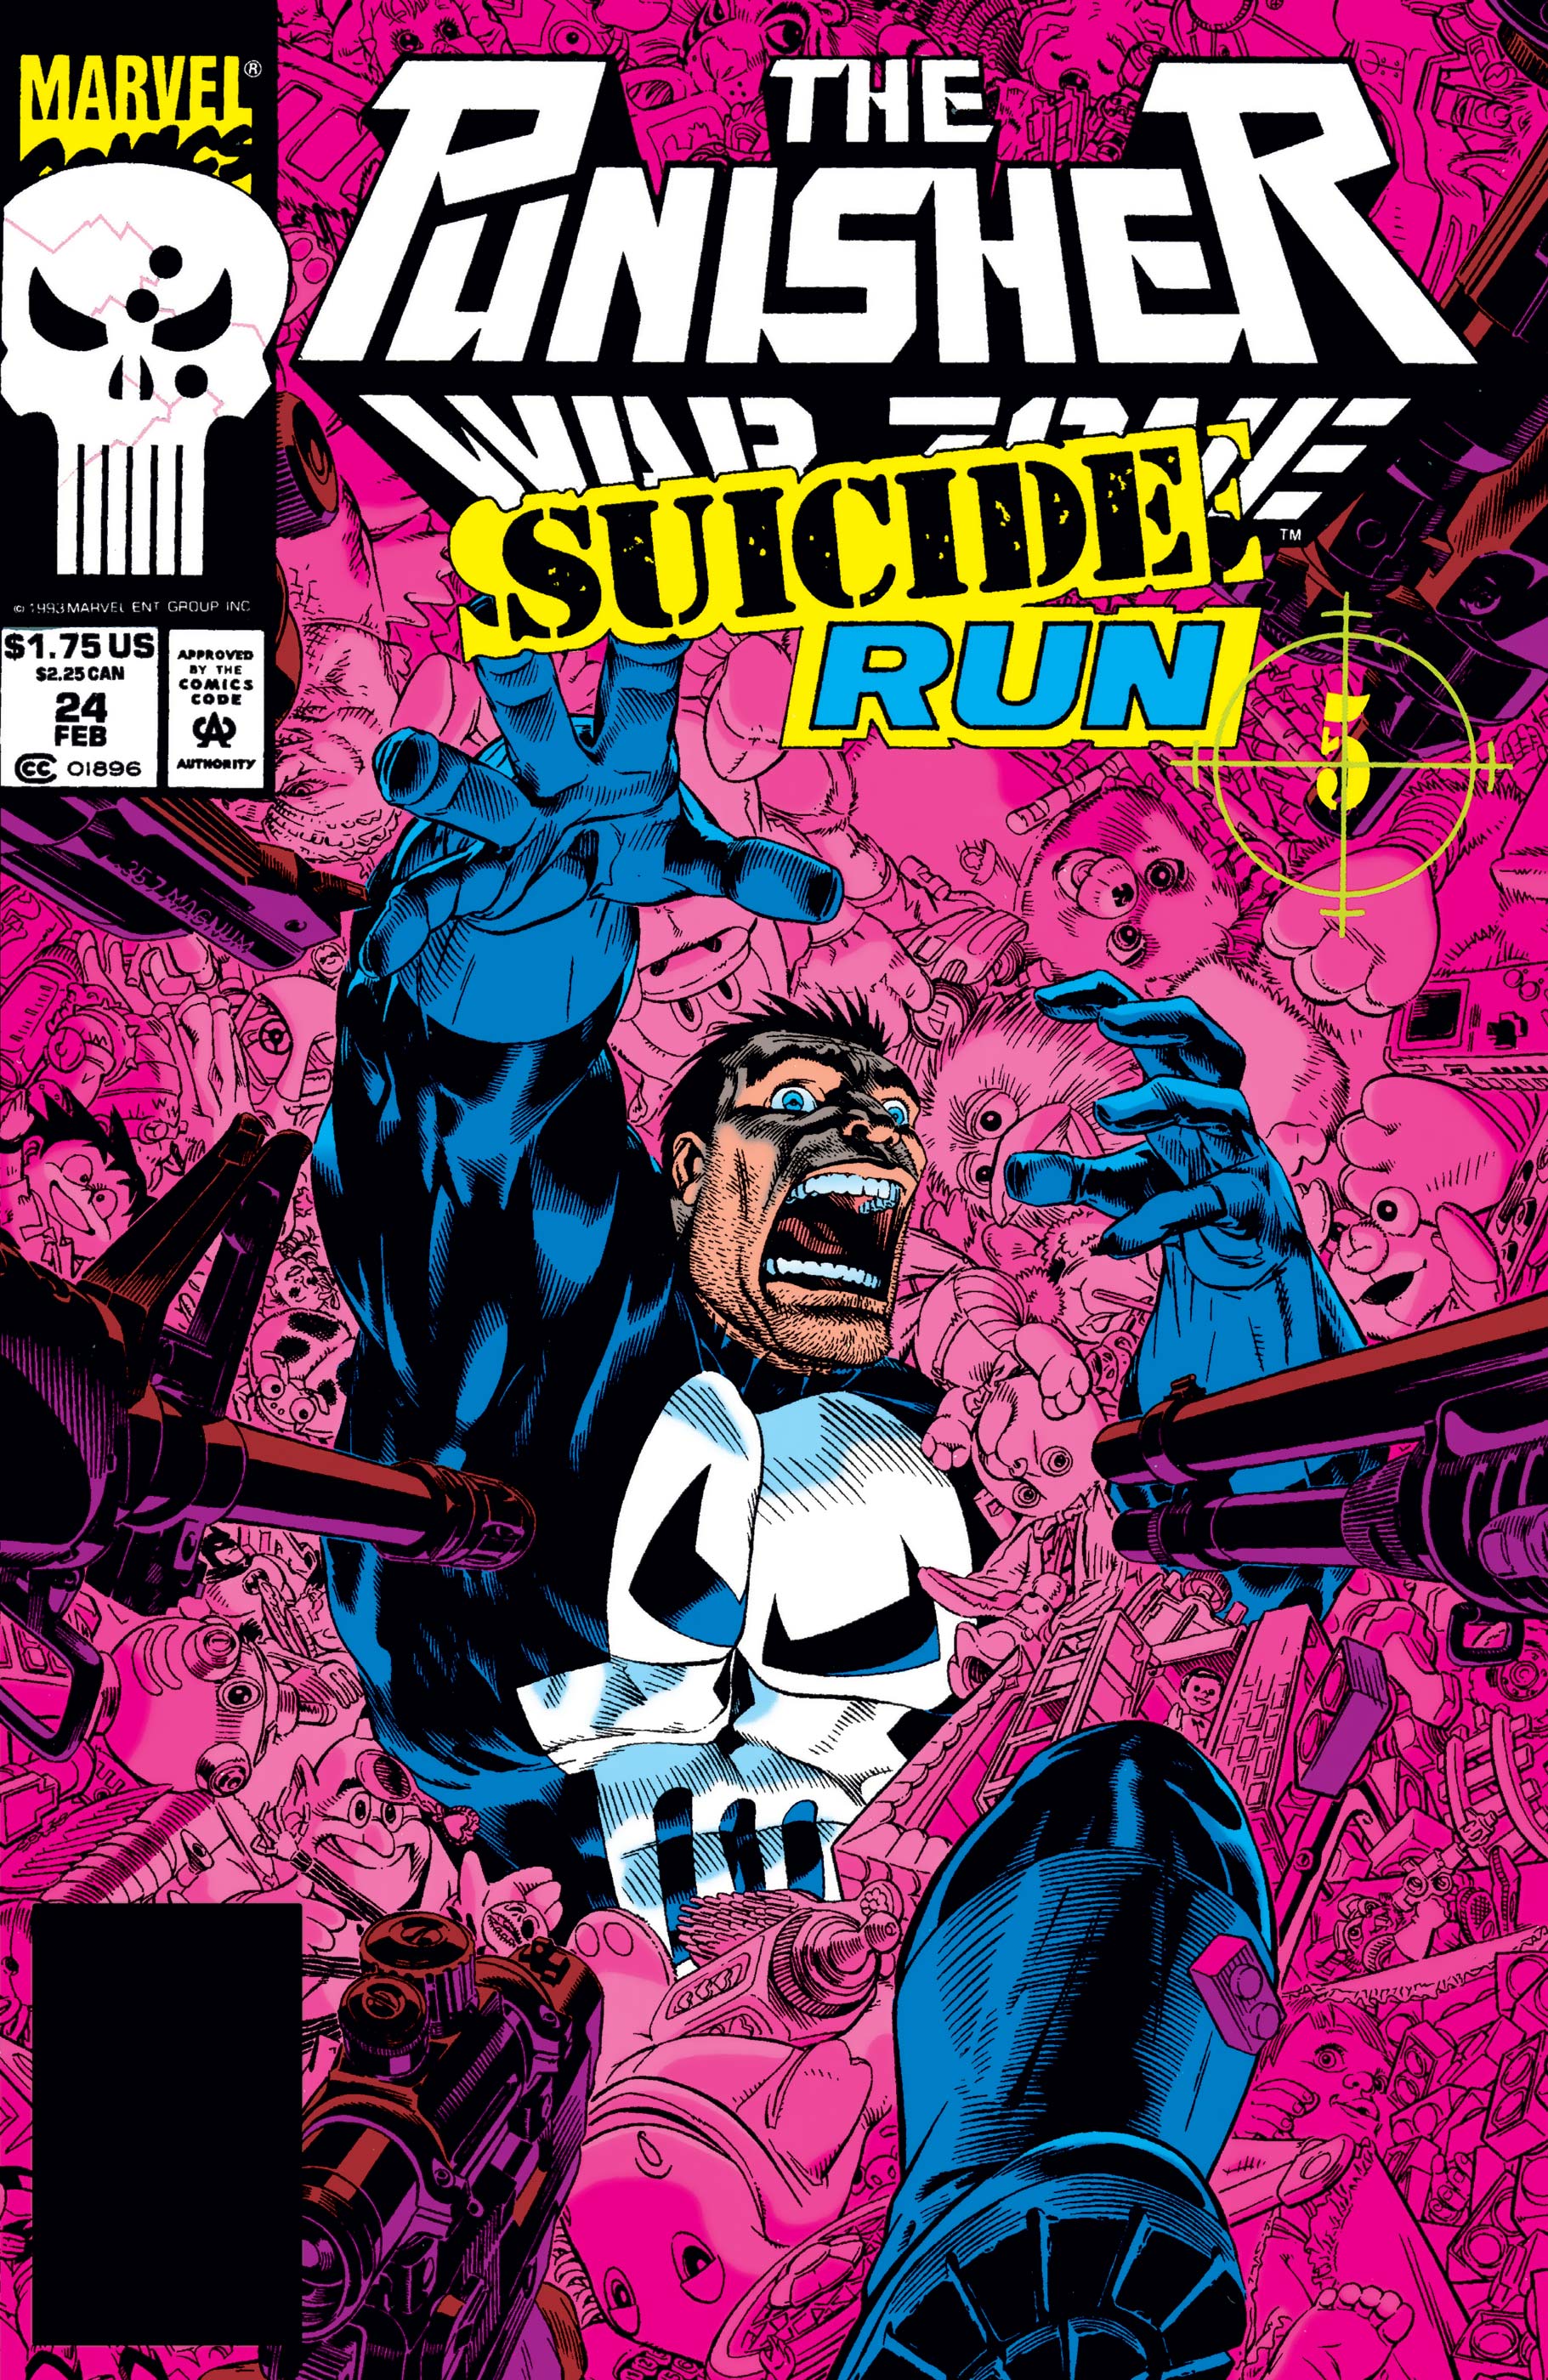 The Punisher War Zone (1992) #30, Comic Issues